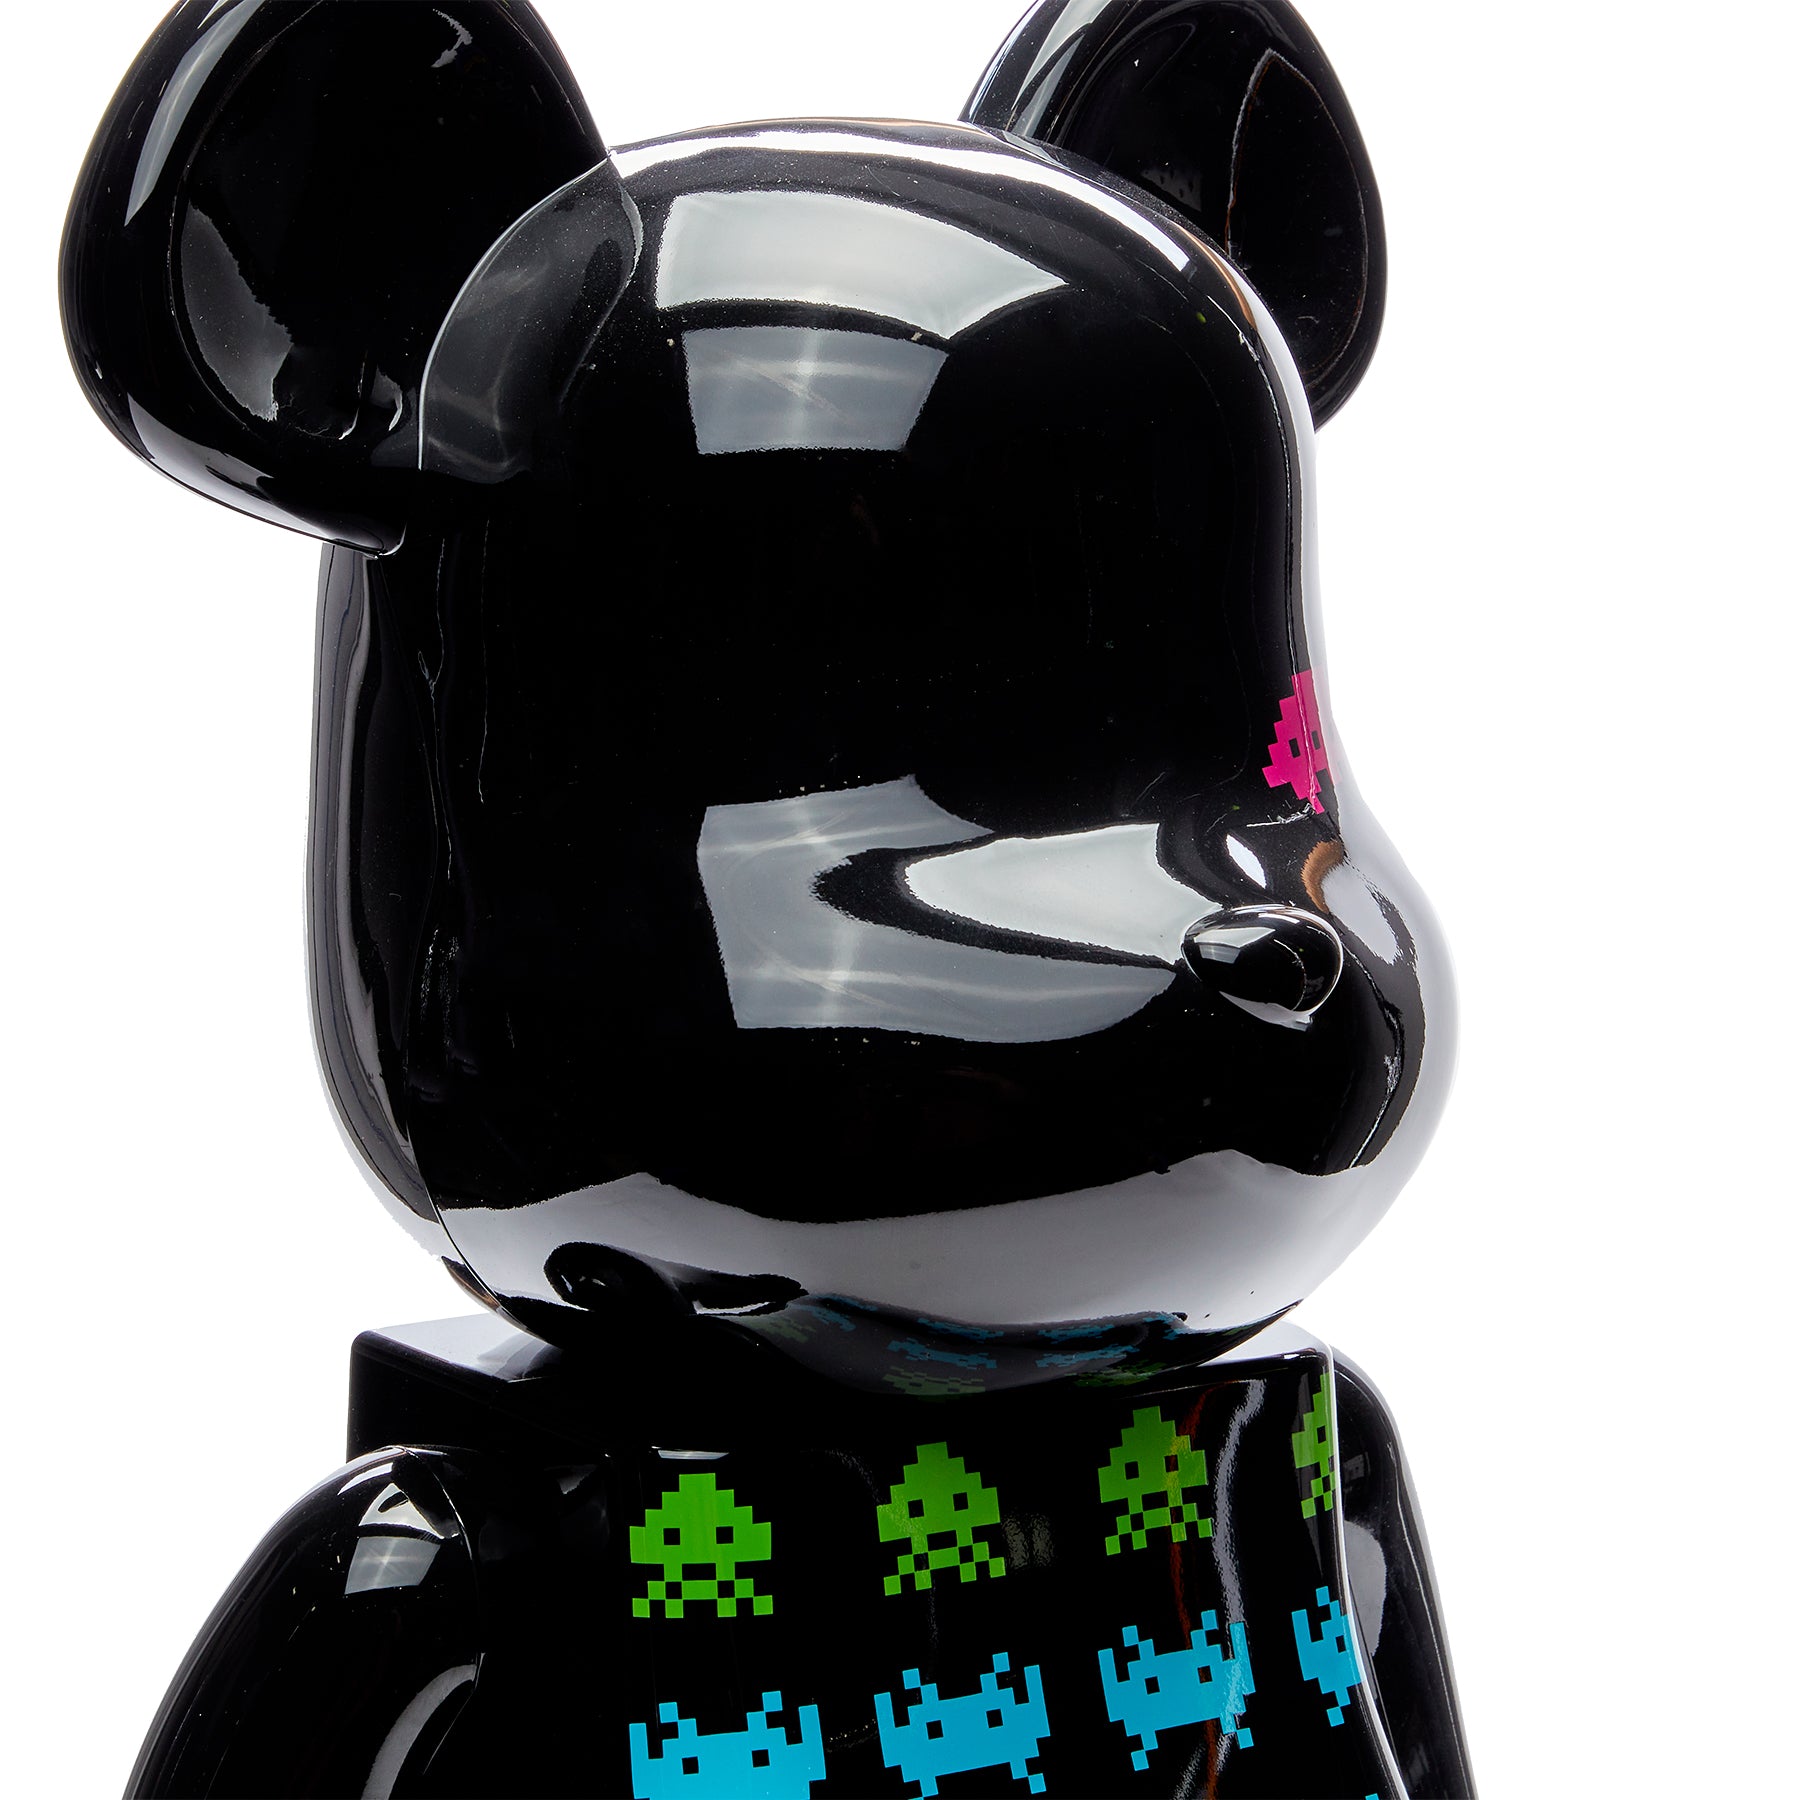 Medicom Toy BEARBRICK Space Invaders 1000% Available For Immediate